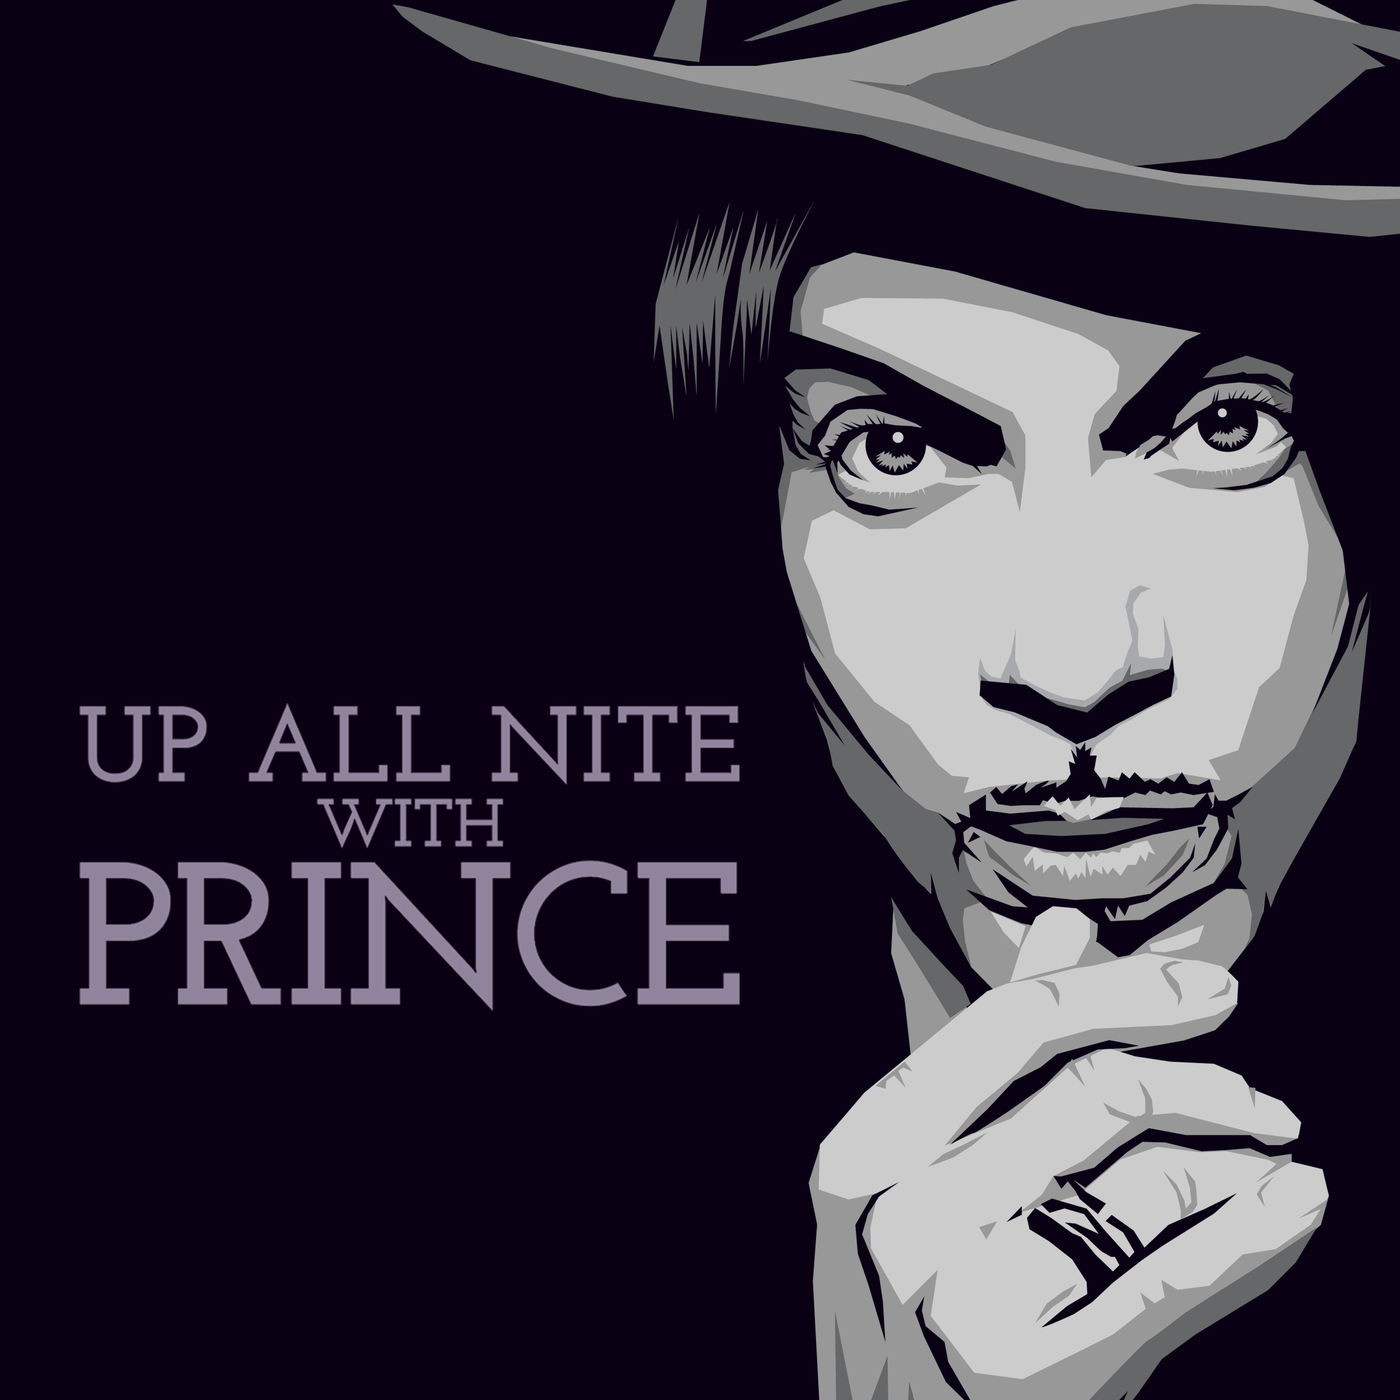 Up All Nite with Prince, Episode 1: The Atrium